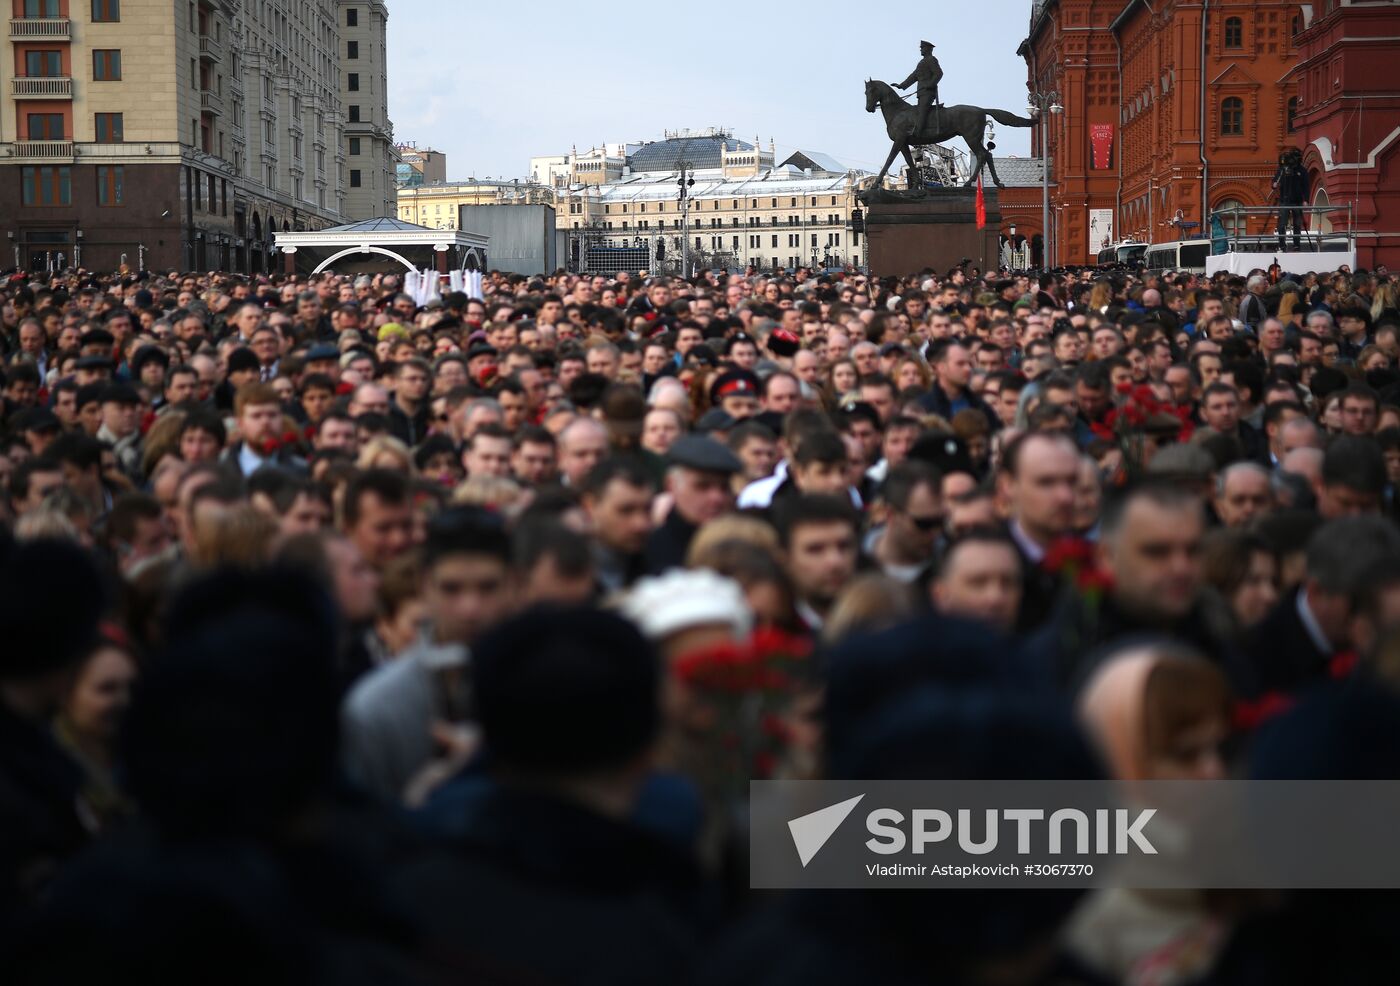 Commemoration and solidarity campaign "Saint Petersburg, we are with you"